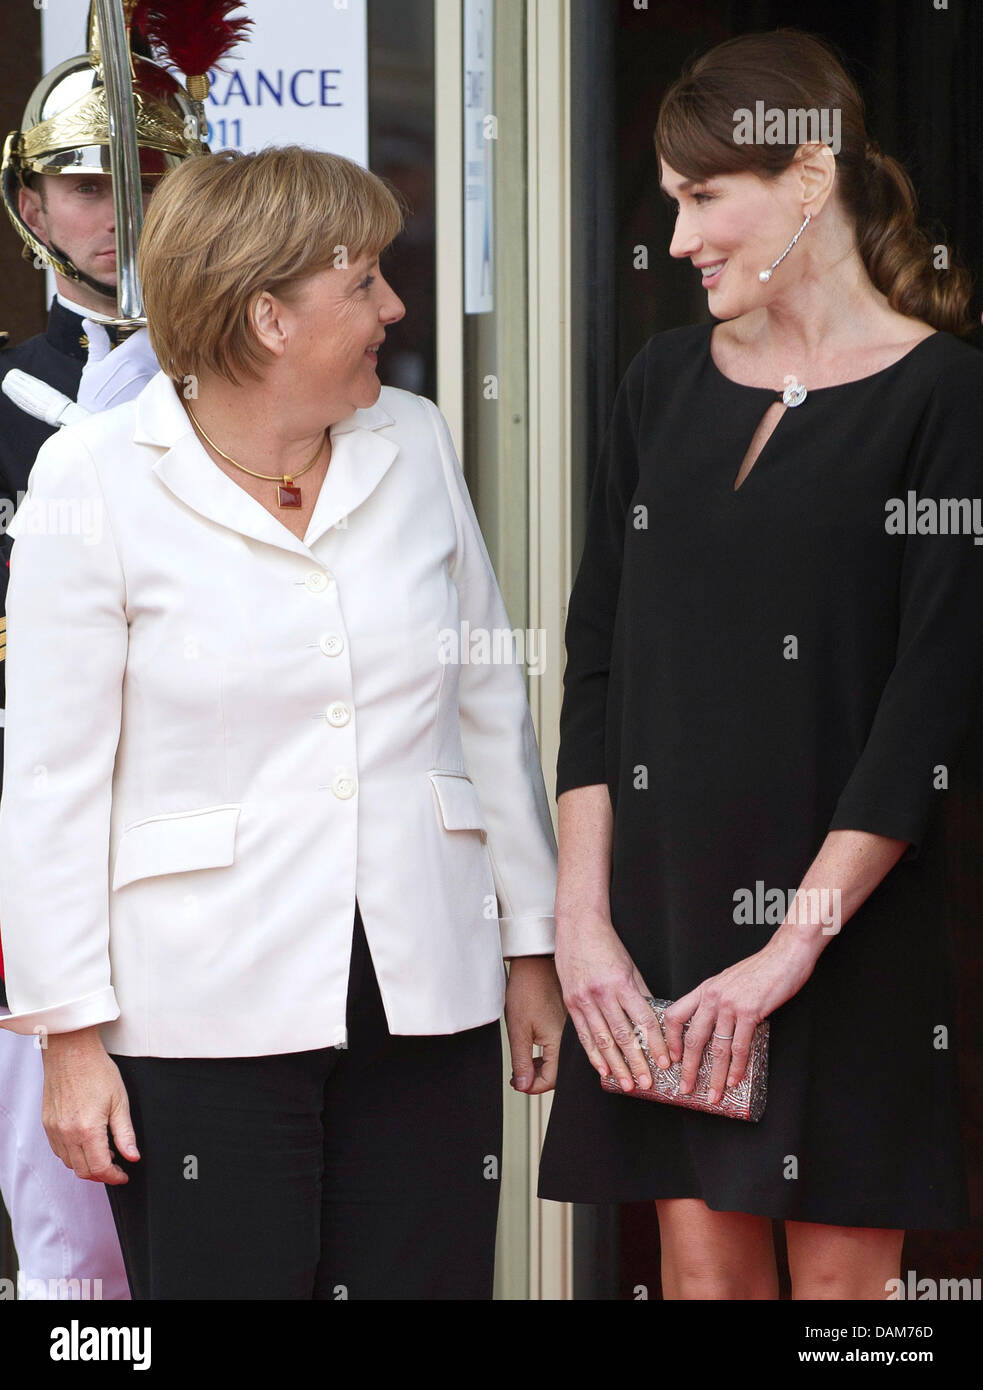 The wife of French President Nicolas Sarkozy, Carla Bruni-Sarkozy (r) greets German Chancellor Angela Merkel for the G8 summit meeting in the seaside resort of Deauville, France, 26 May 2011. The G8 summit meeting takes place in Deauville on 26 and 27 May 2011. Photo: Peer Grimm Stock Photo